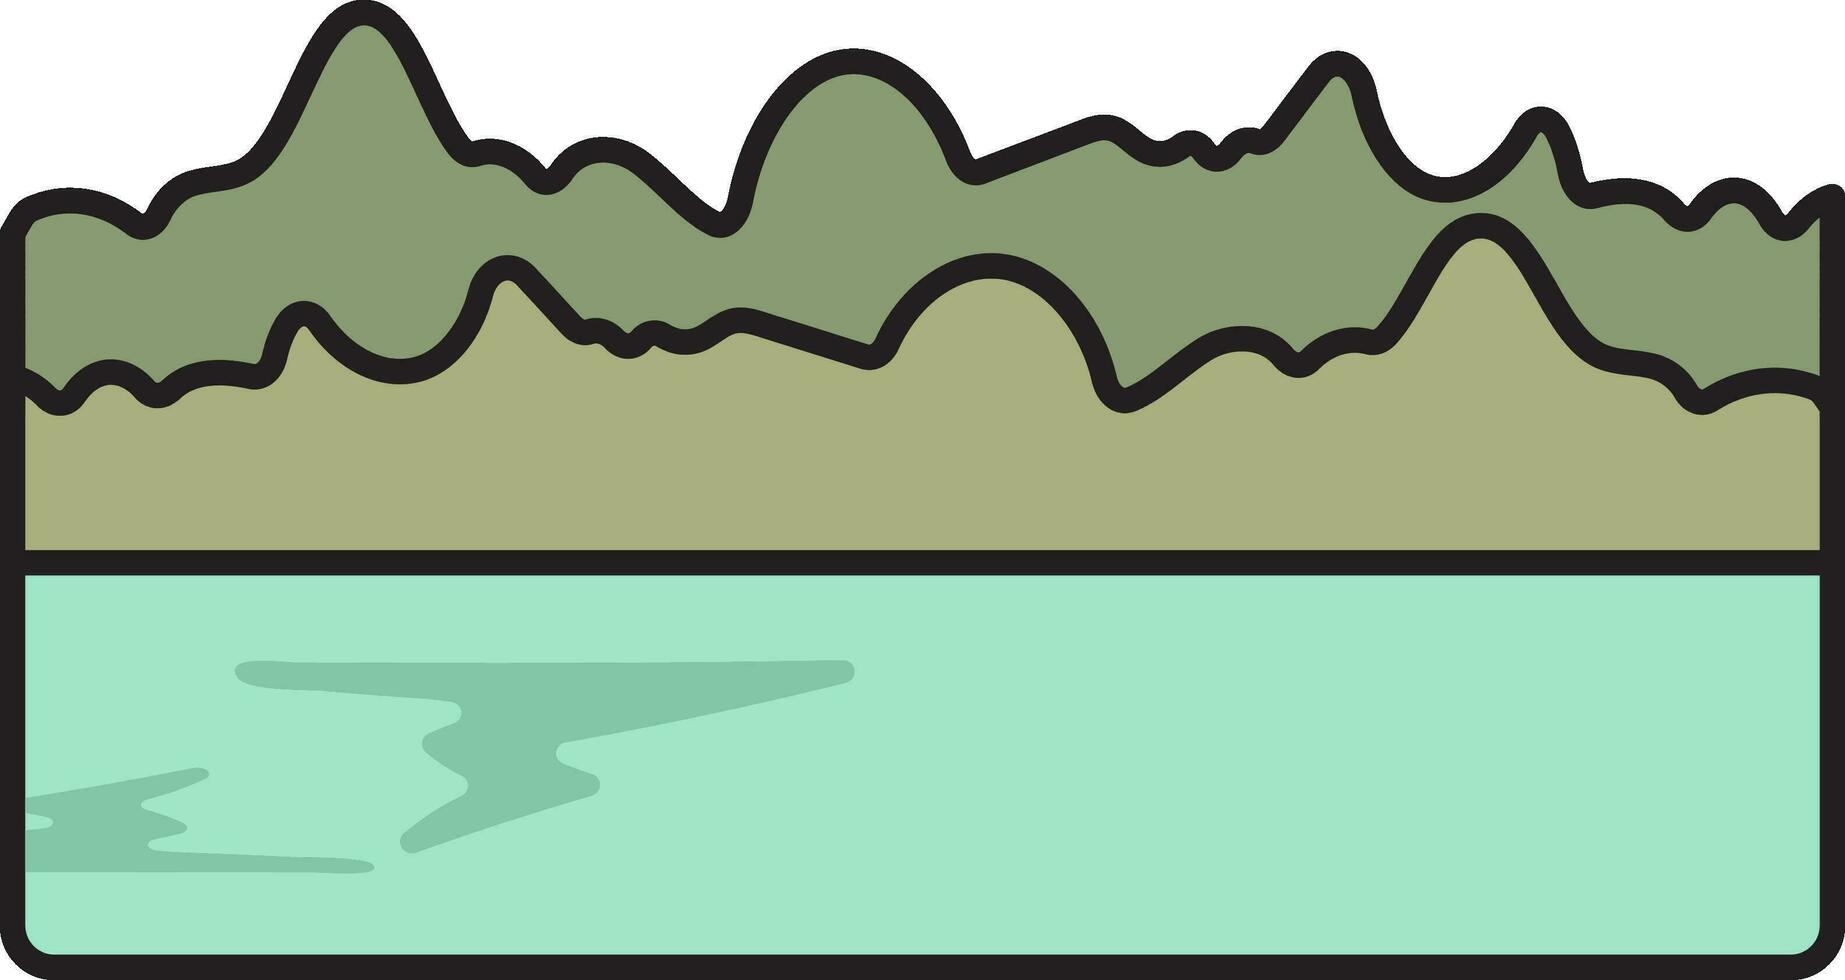 Landscape River Icon In Green And Teal Color. vector